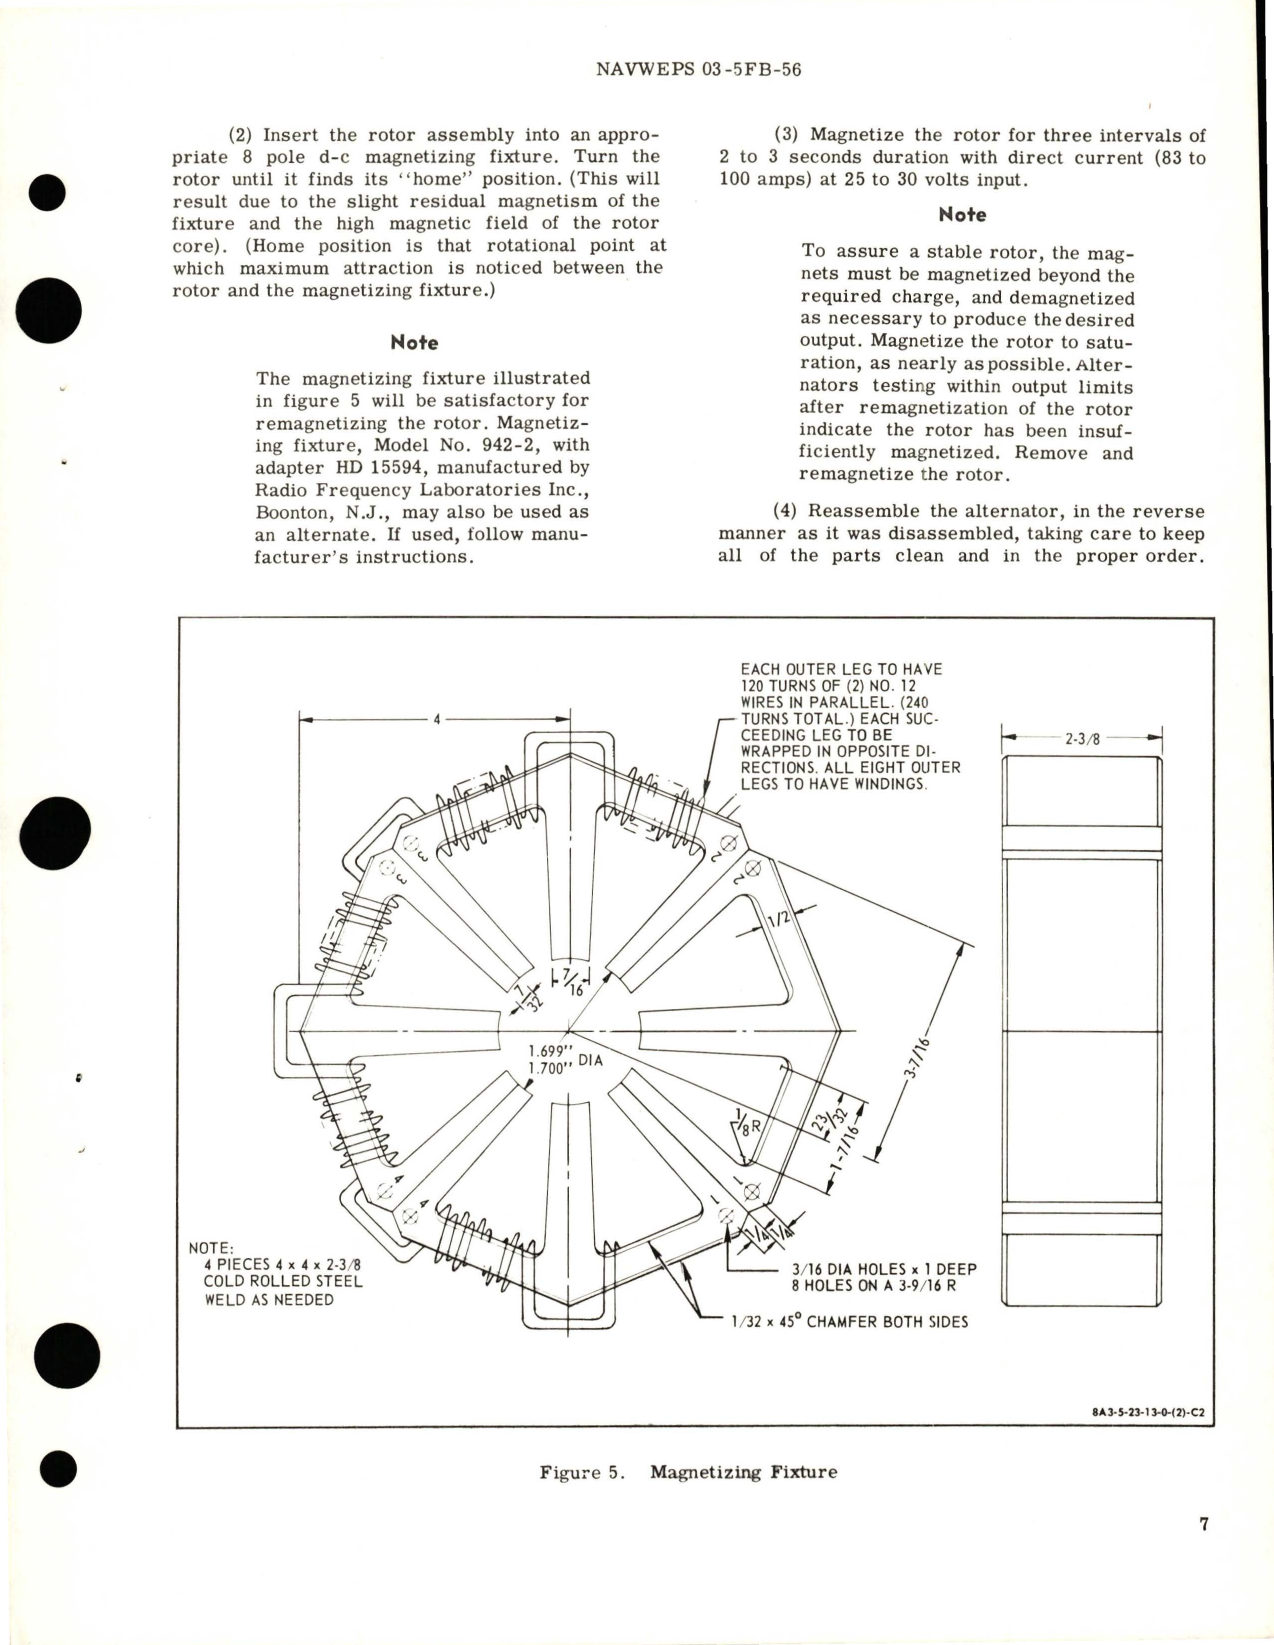 Sample page 9 from AirCorps Library document: Overhaul Instructions with Parts Breakdown for Control Alternator - Model 5ASB40NJ21